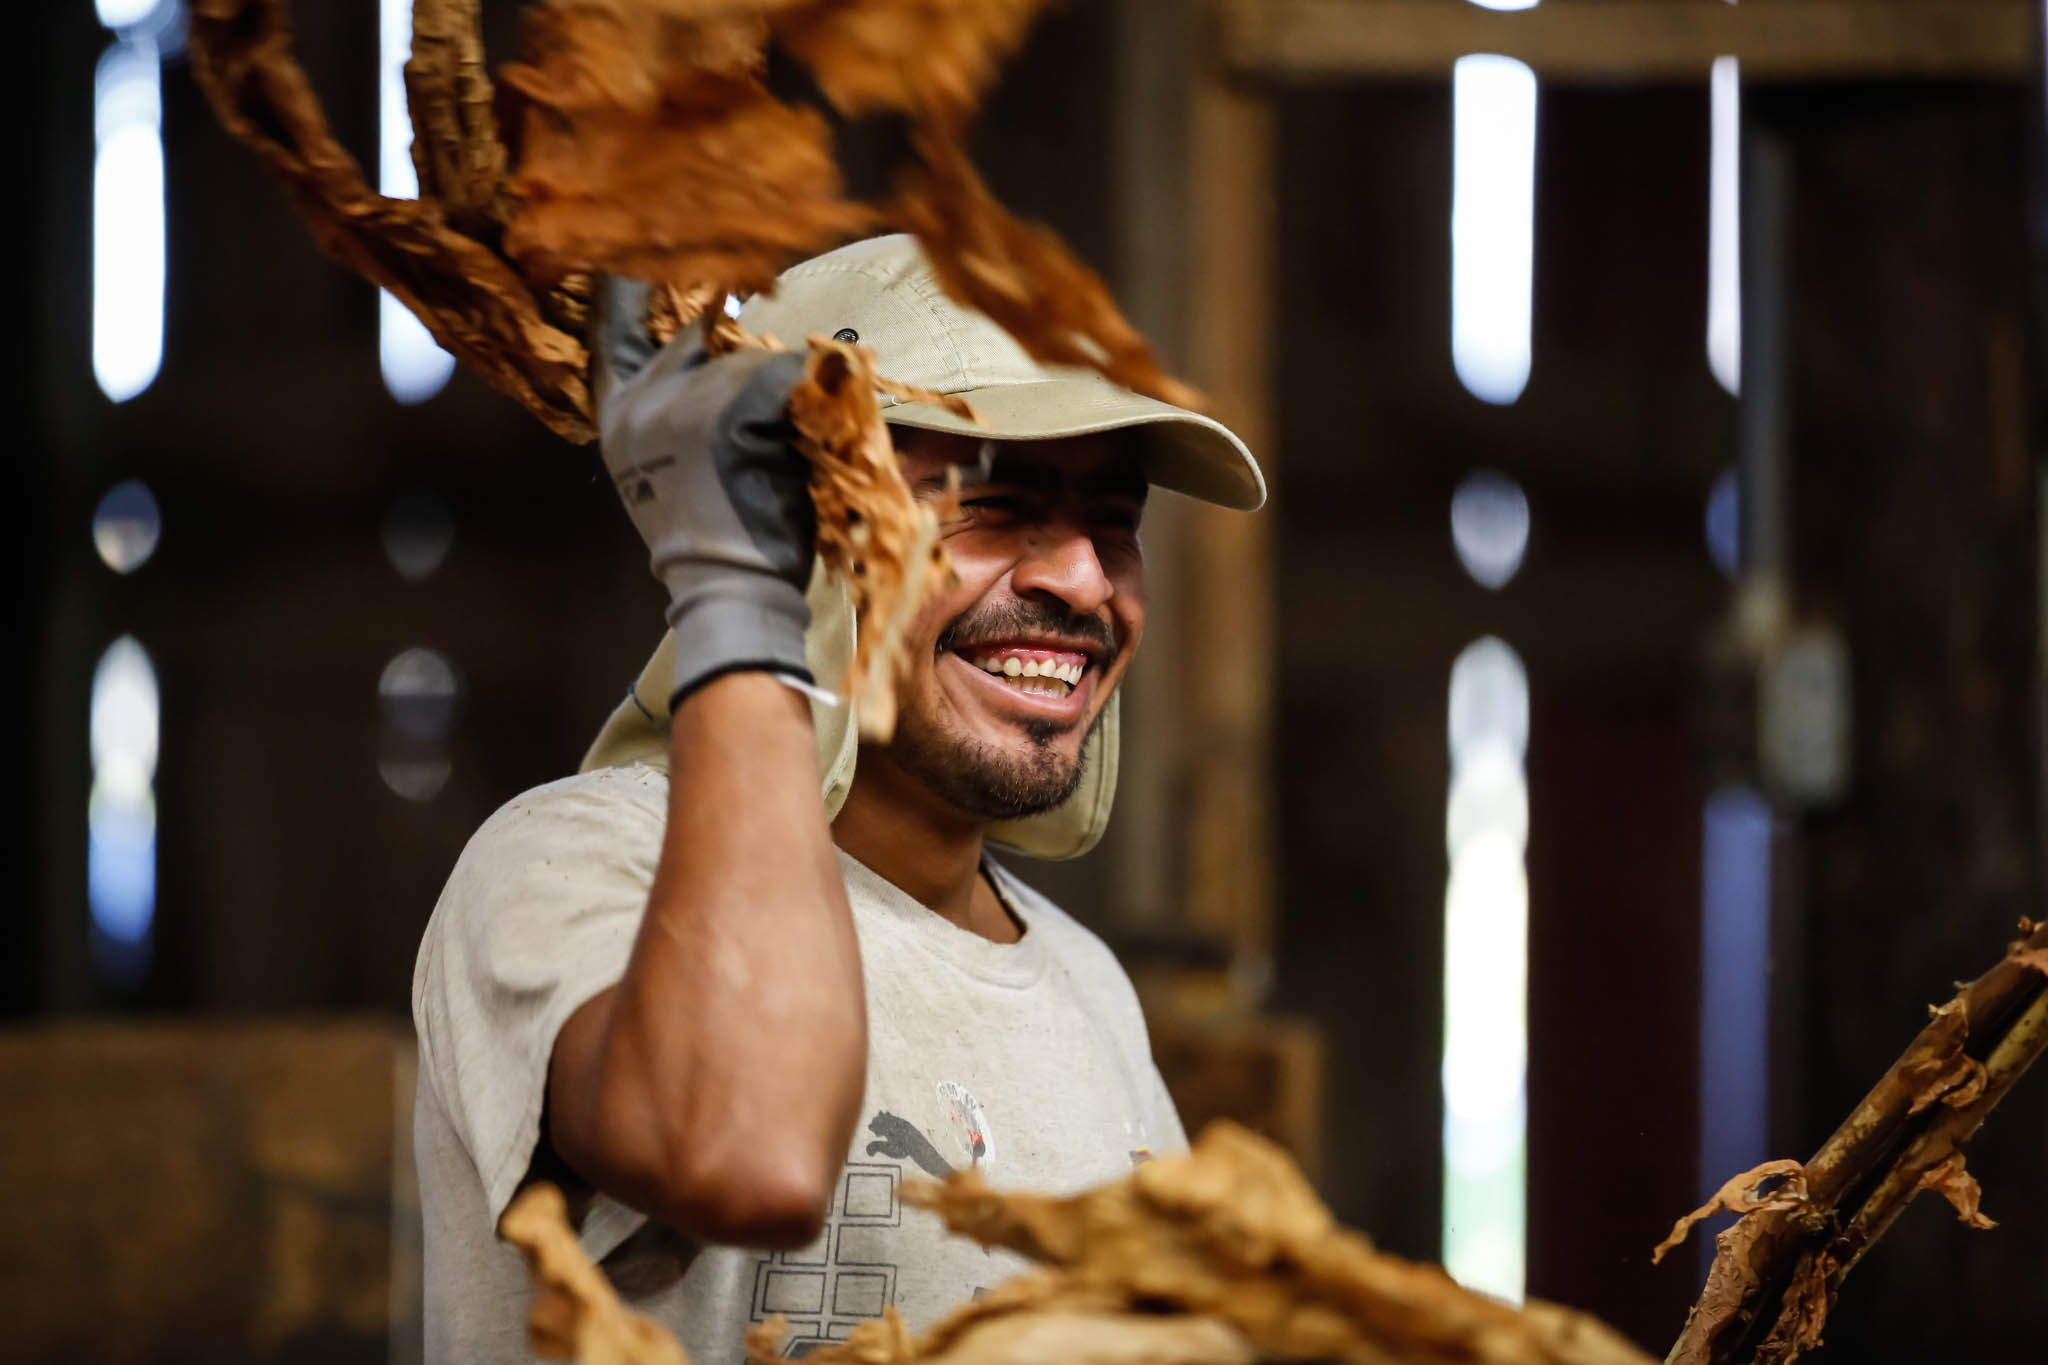  Javi Crúz, a 34-year-old migrant worker from Mexico, is proud to have a job in the U.S. "Working on this farm gives me an opportunity to give back to my family. Its hard to find this opporutnities back home," he says.&nbsp; 